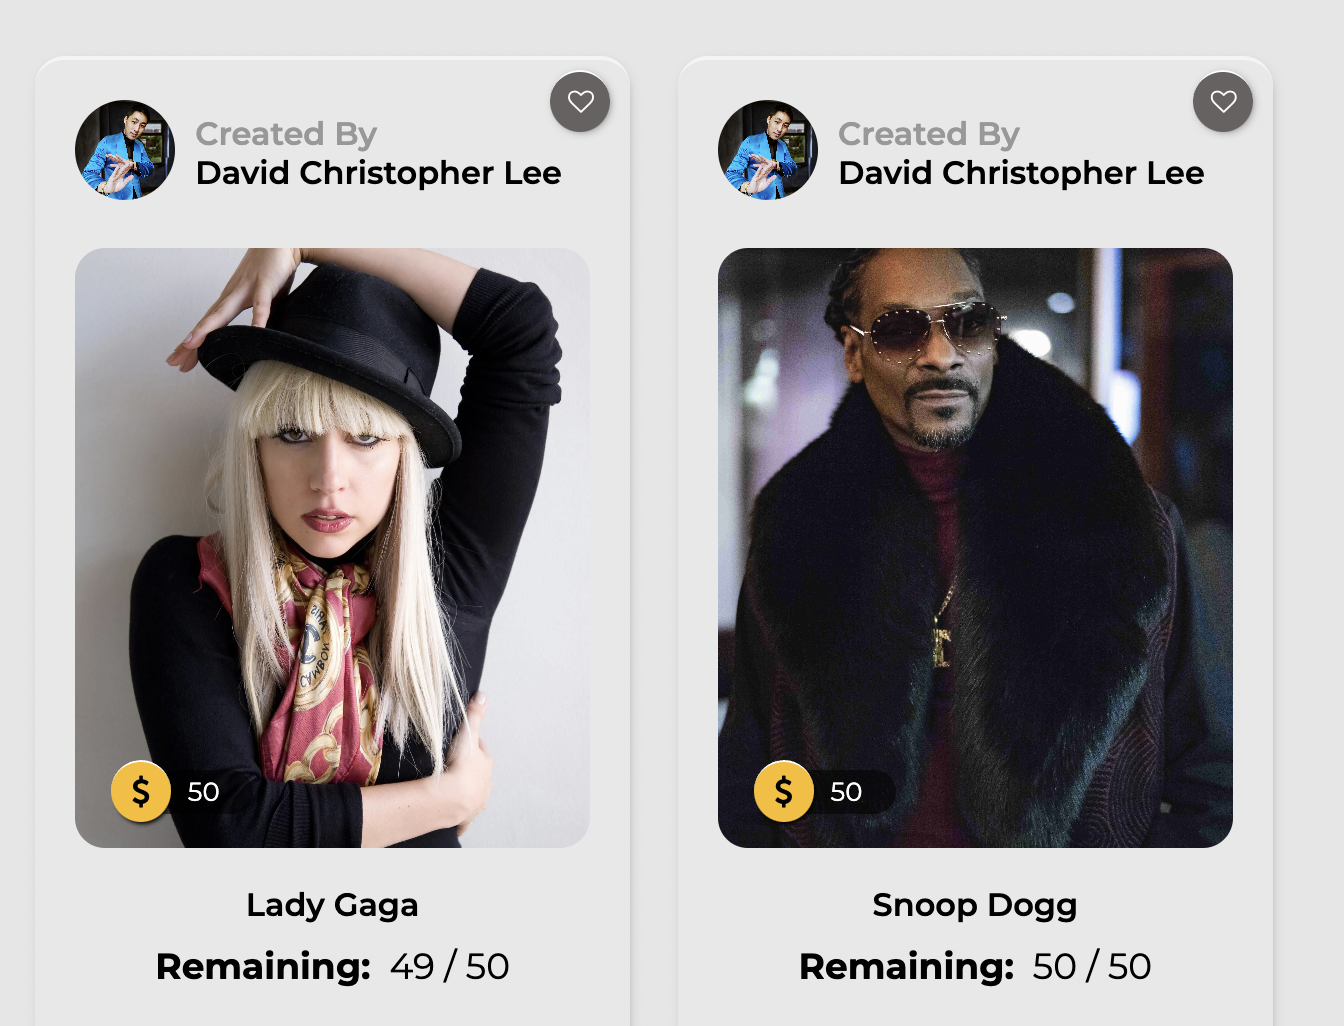 Digital art goes A-list: Illuminate.art showcases NFTs of Lady Gaga and Snoop Dogg's portraits by David Christopher Lee